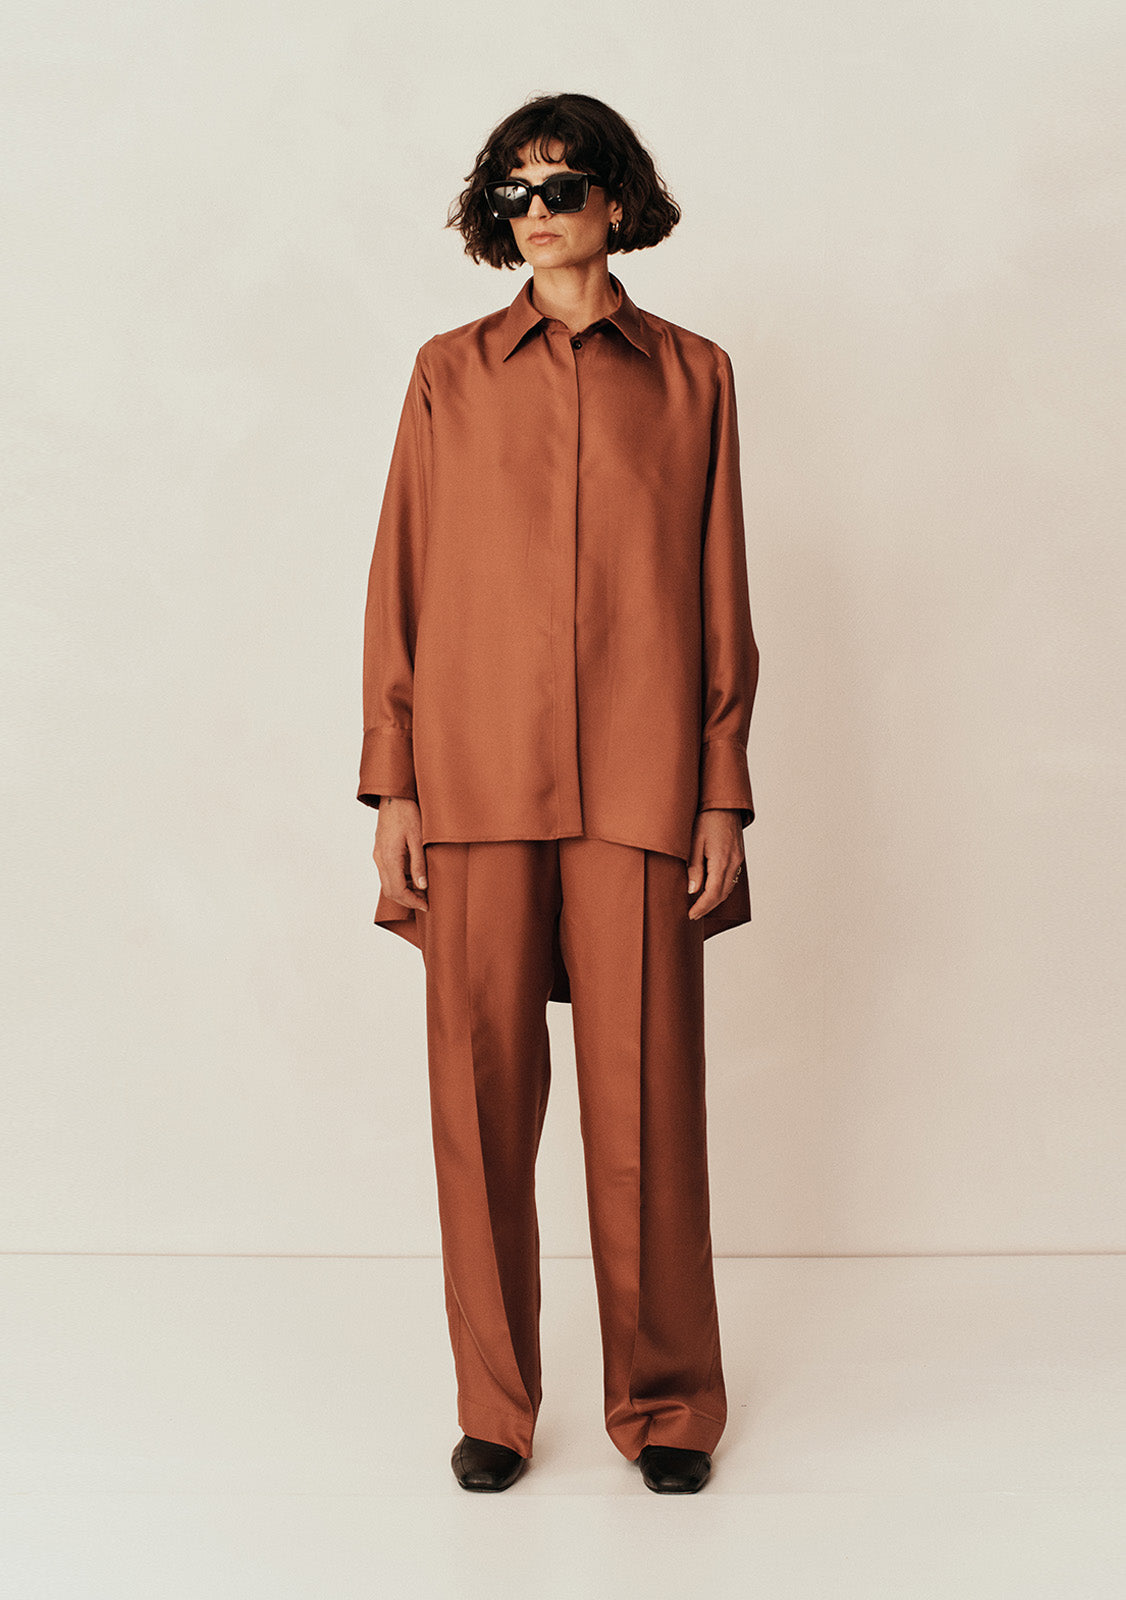 Esse Classico Drape Silk Shirt in Plain Sienna now available at TNT The New Trend Australia.